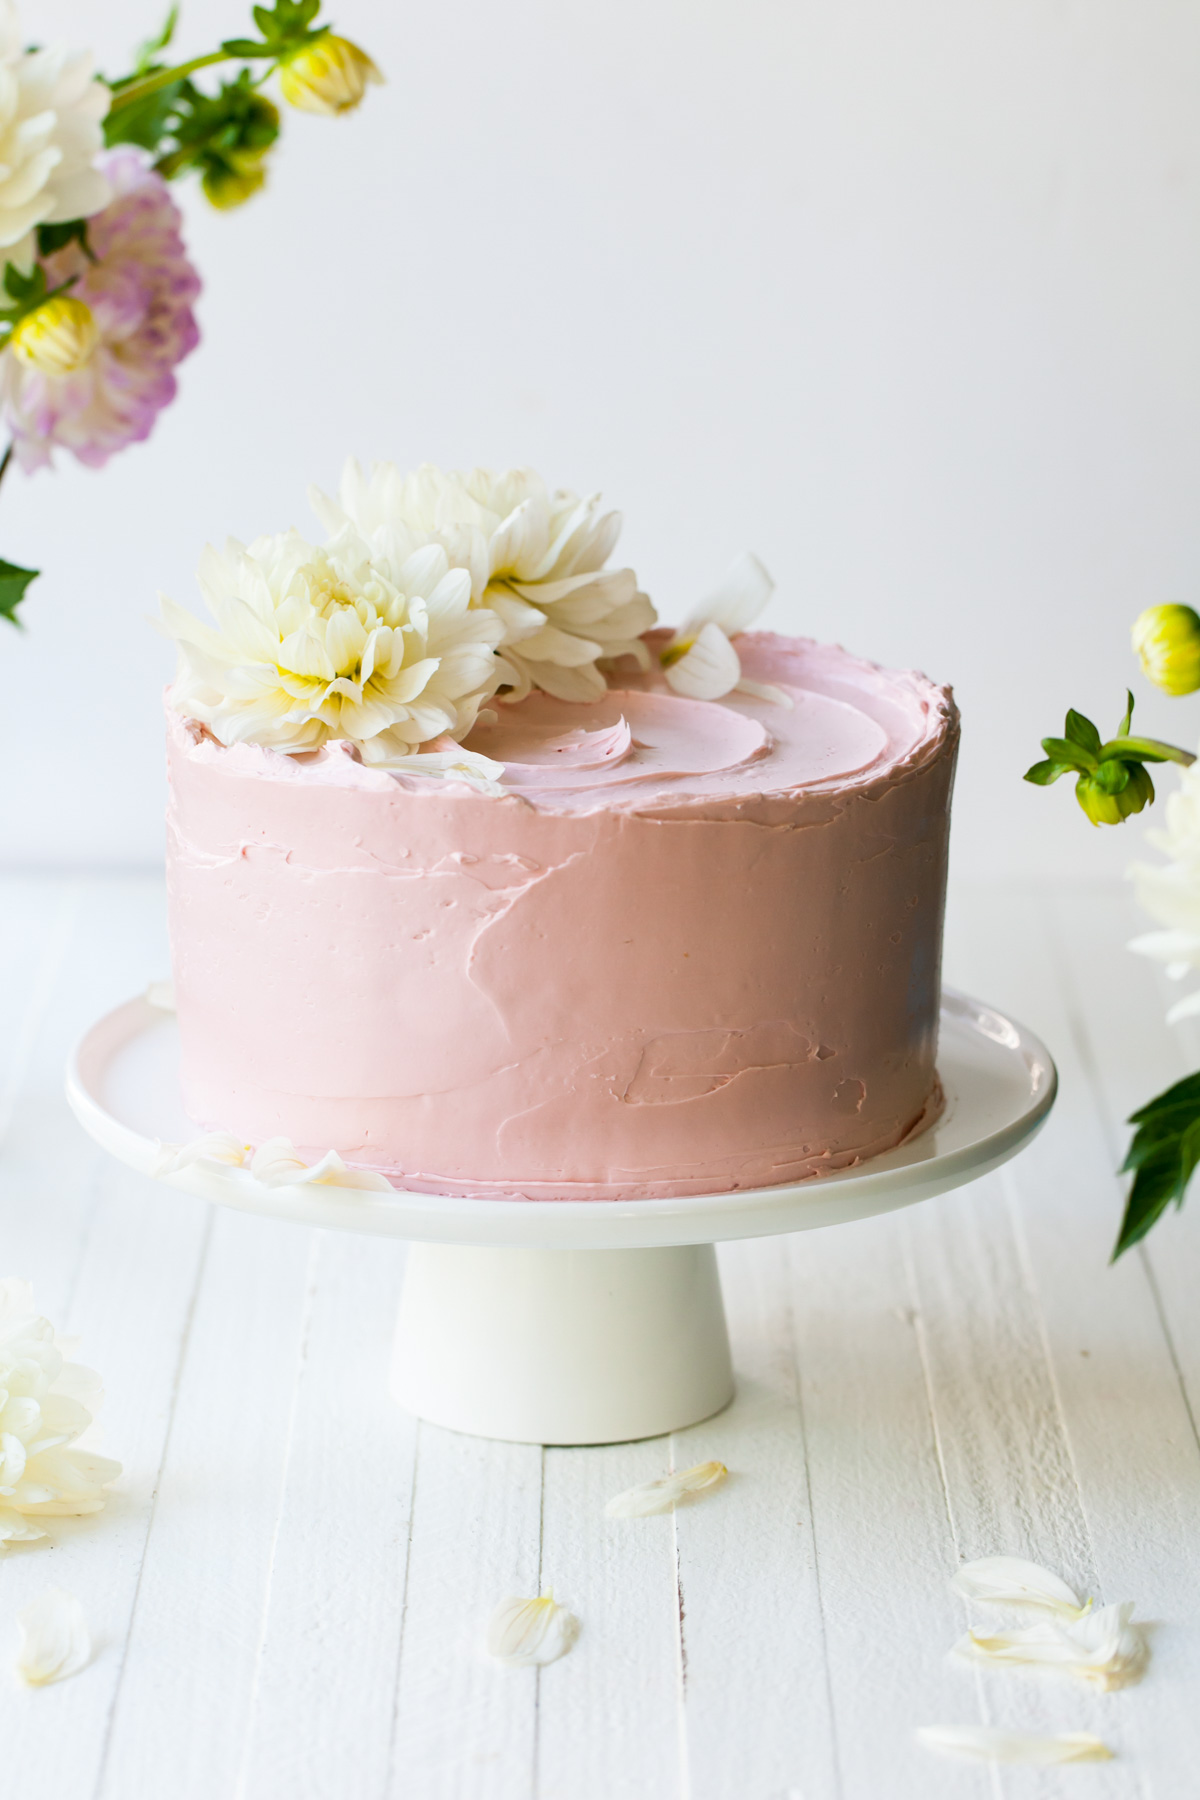 A pink French buttercream cake with white flowers on top of a white cake stand